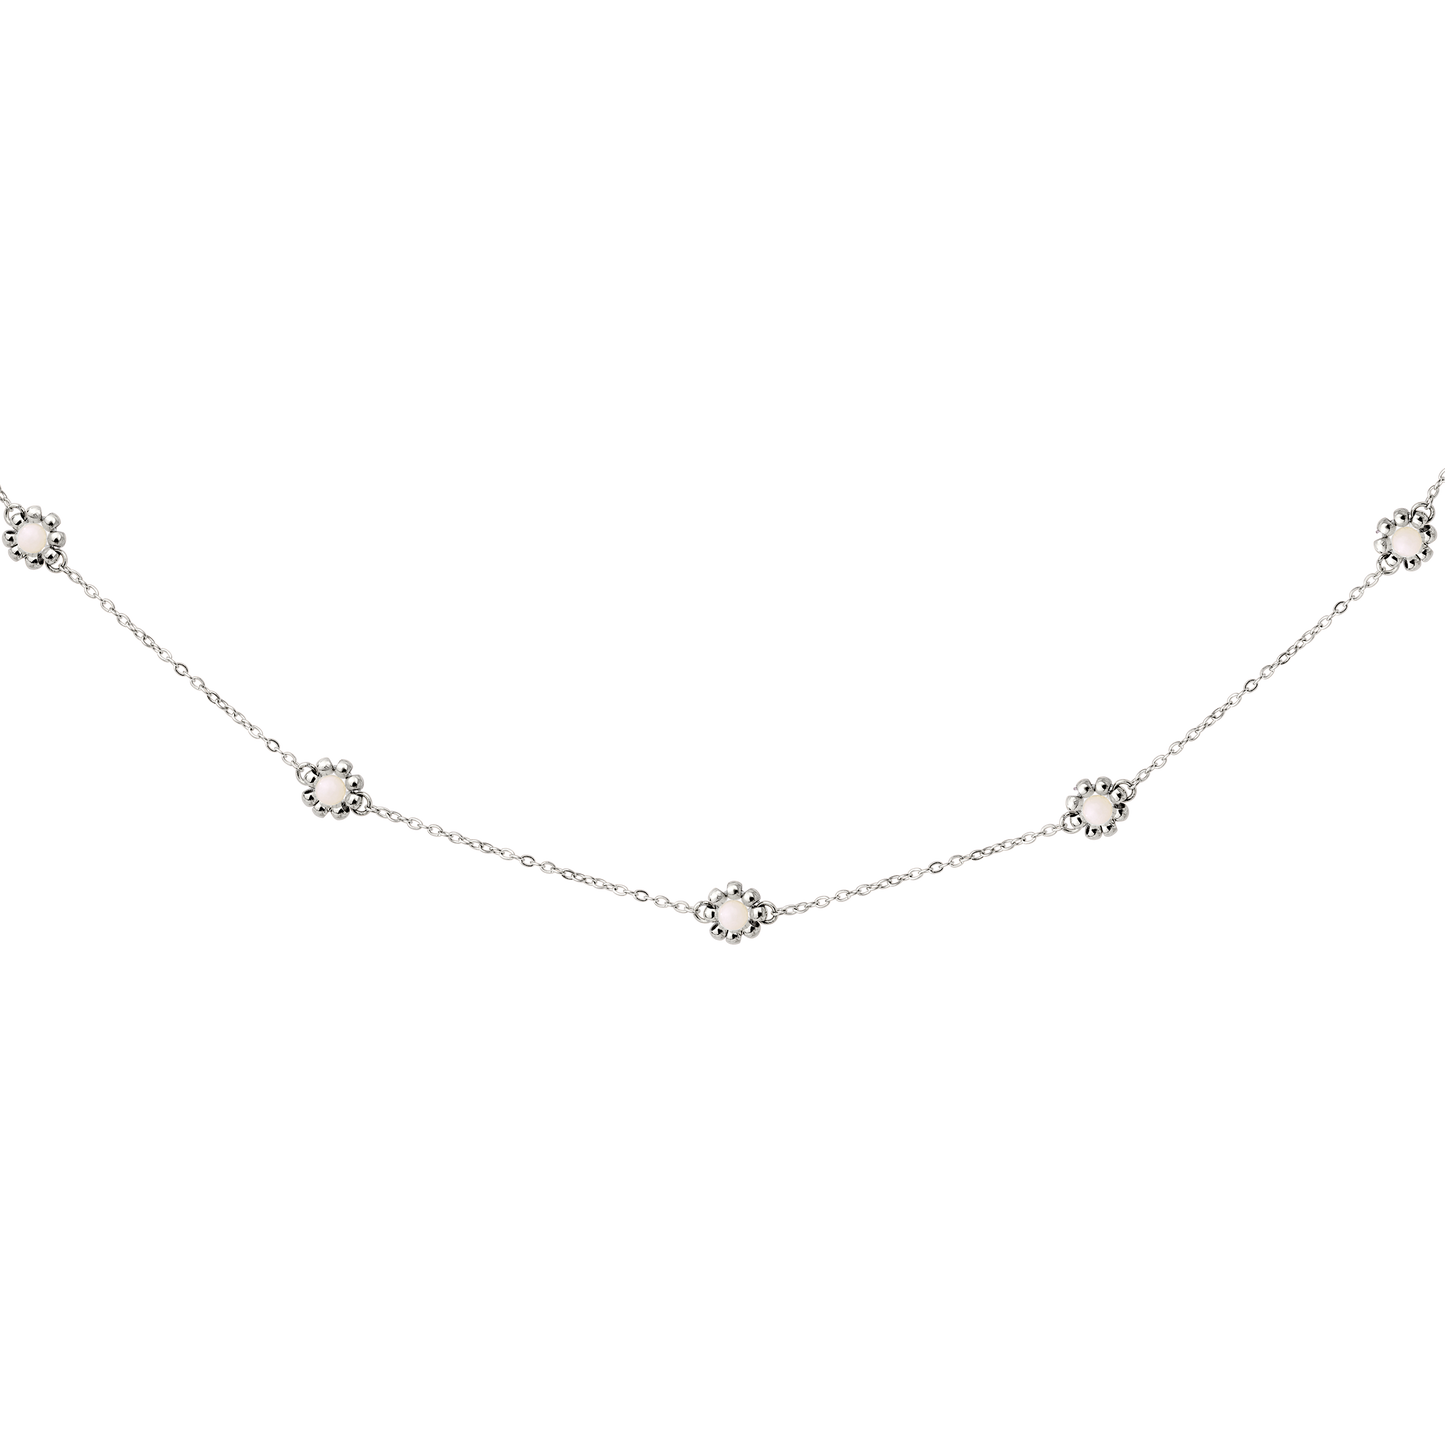 Flower 'n' Beads Necklace Silber